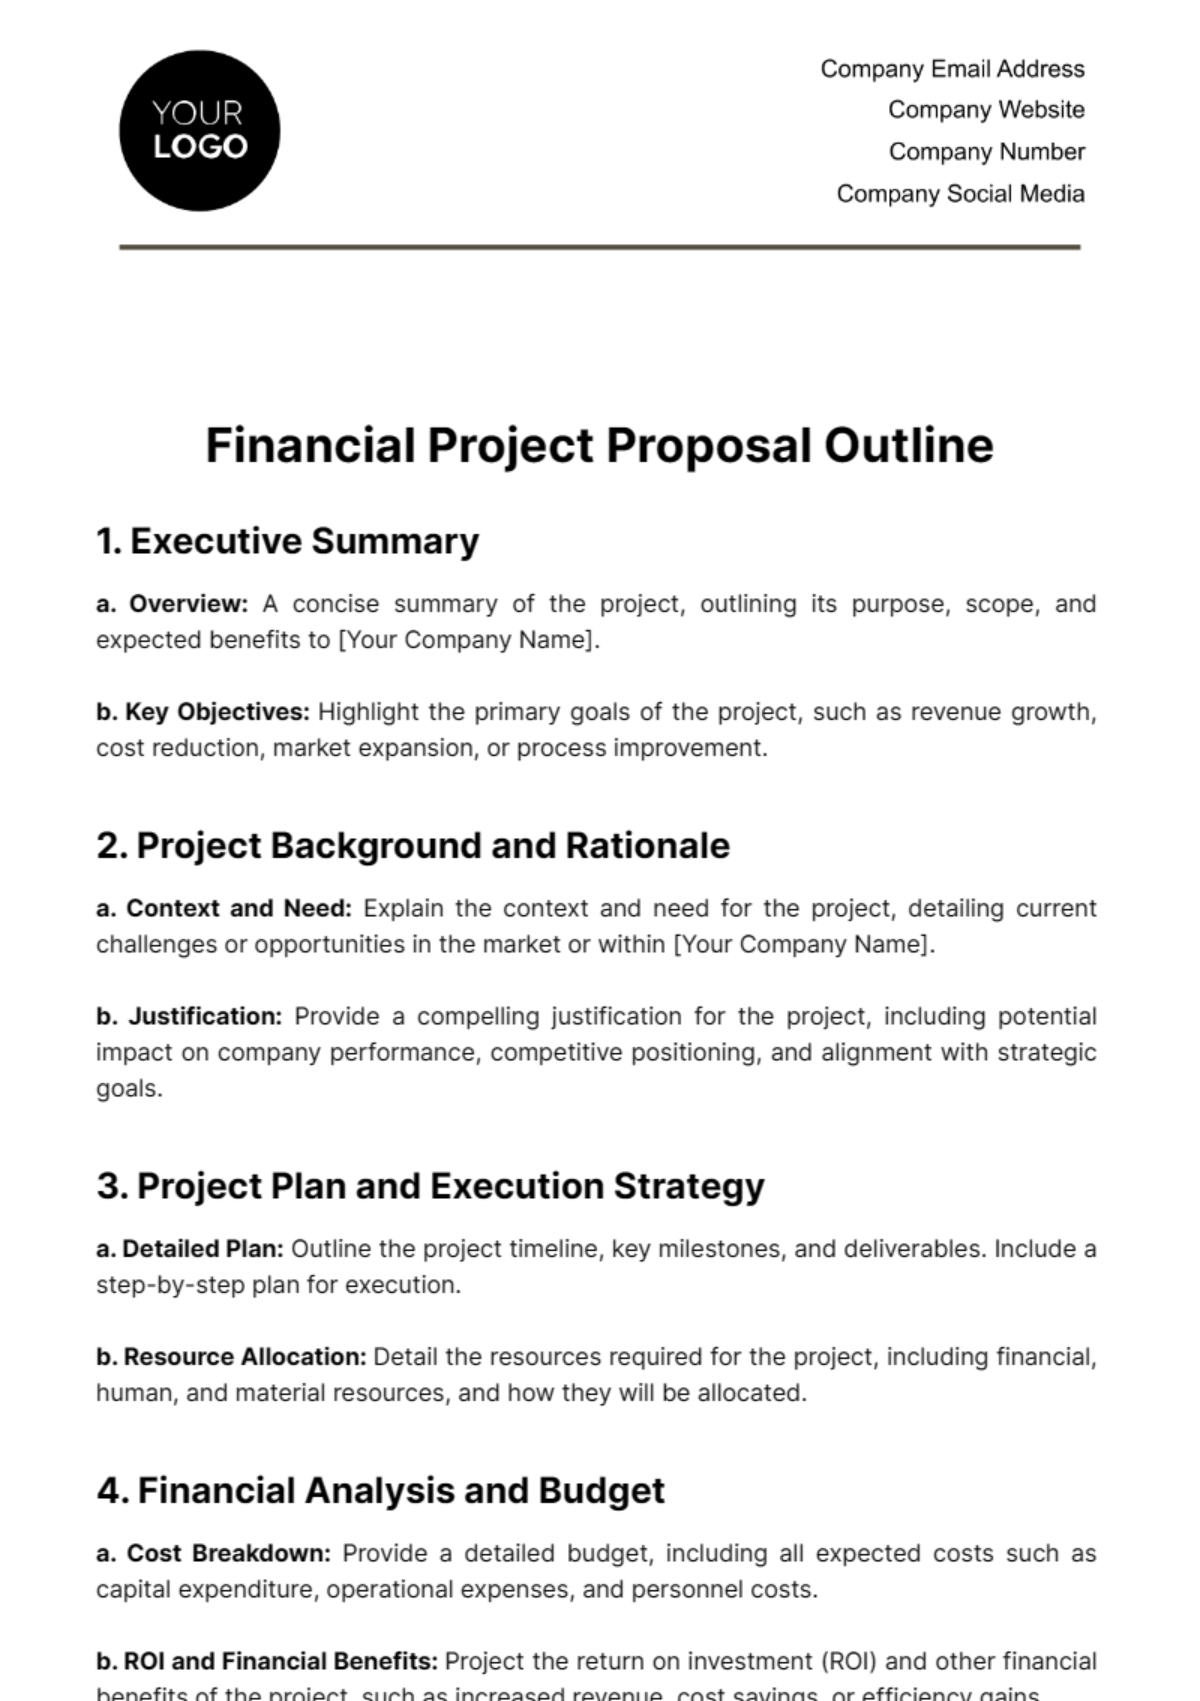 Financial Project Proposal Outline Template